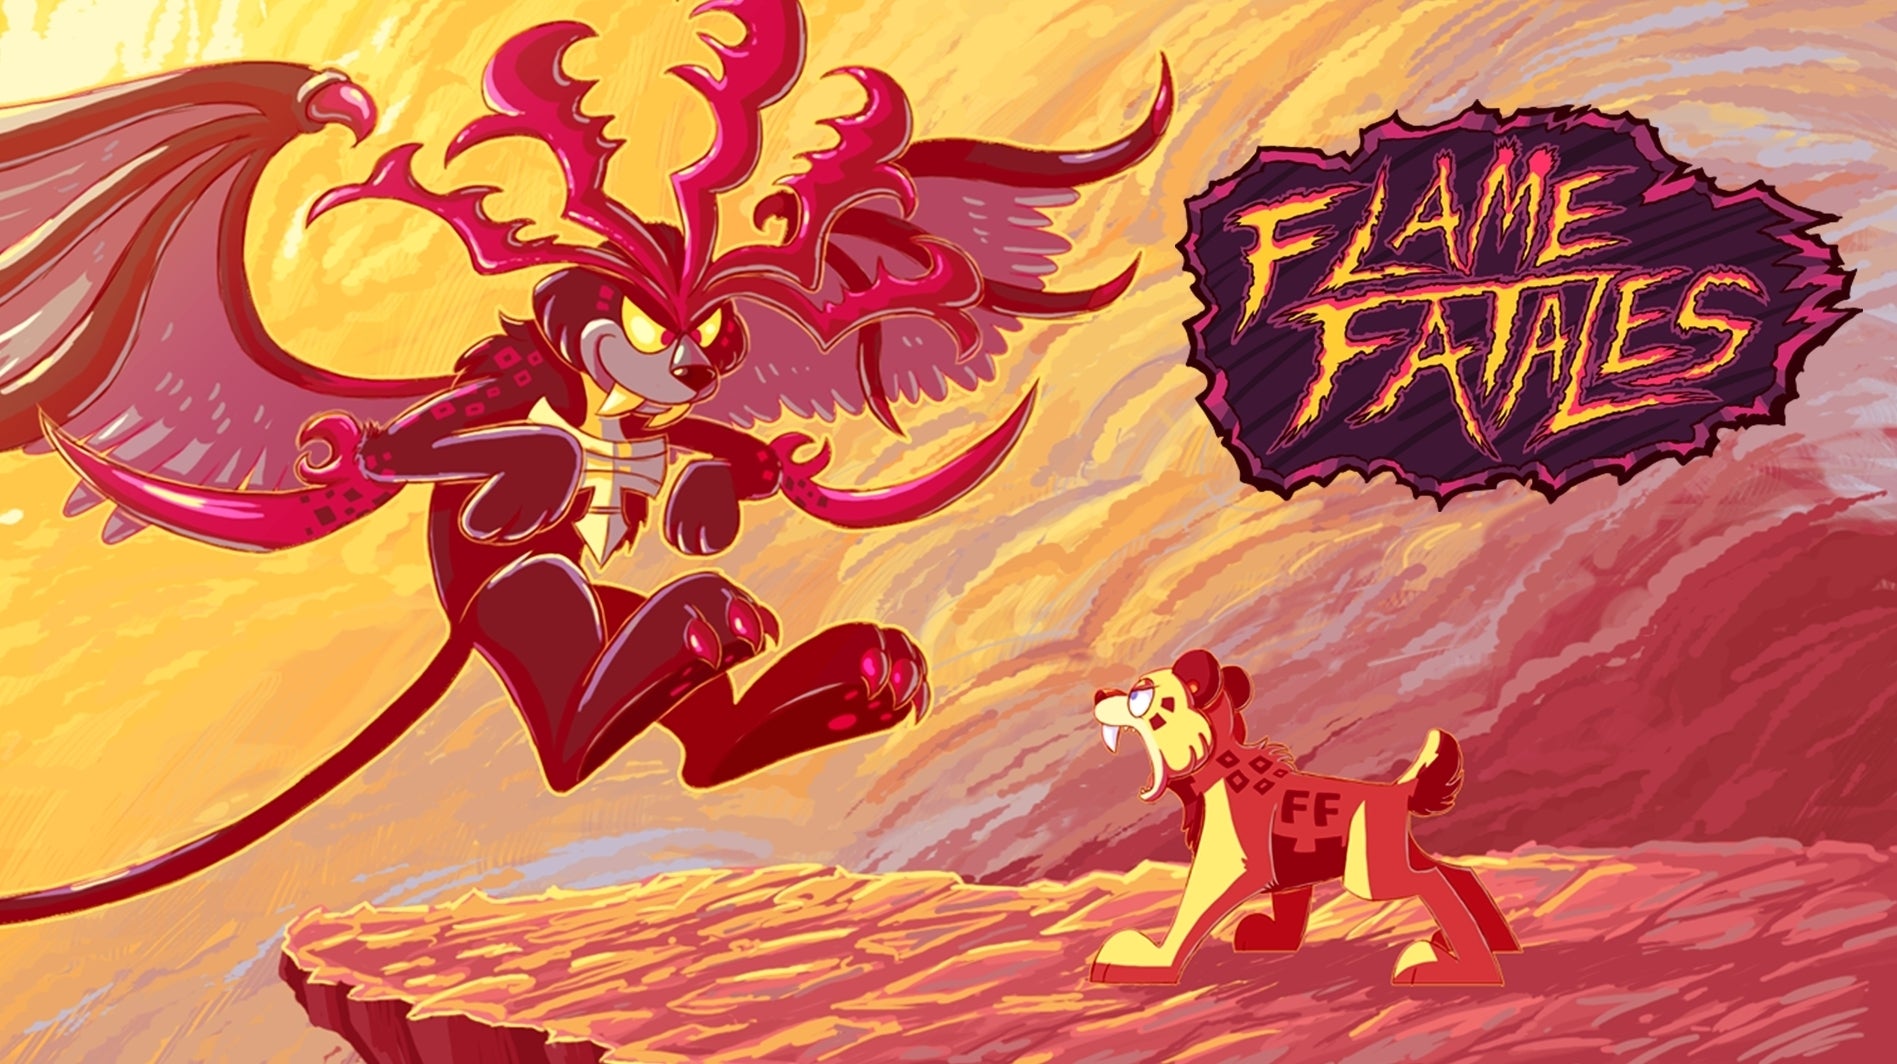 Image for All-women speedrunning event Flame Fatales unveils schedule